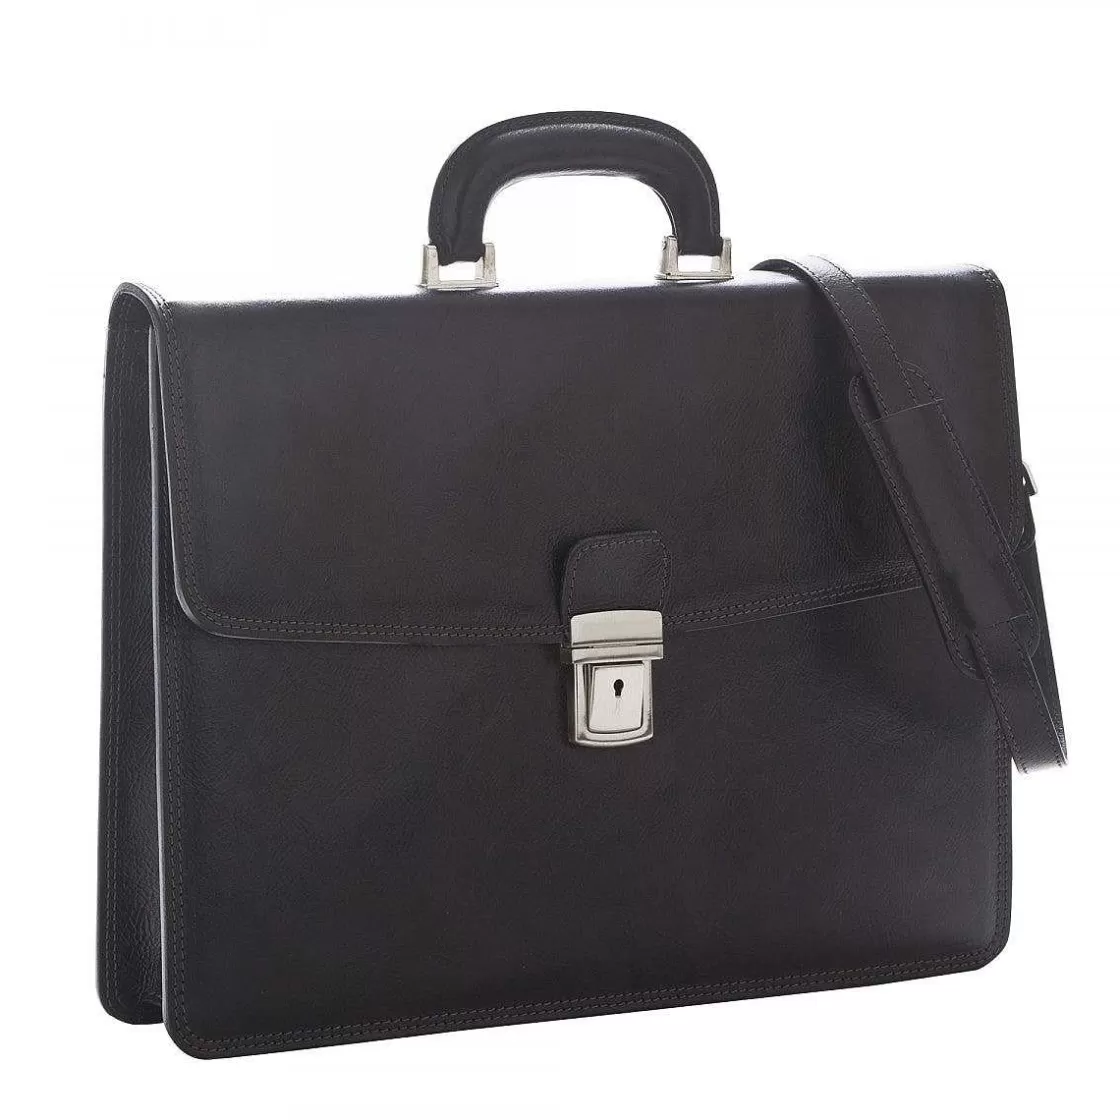 Leonardo Classic Professional Briefcase In Full-Grain Leather With Flap Closure And Adjustable Shoulder Strap Shop